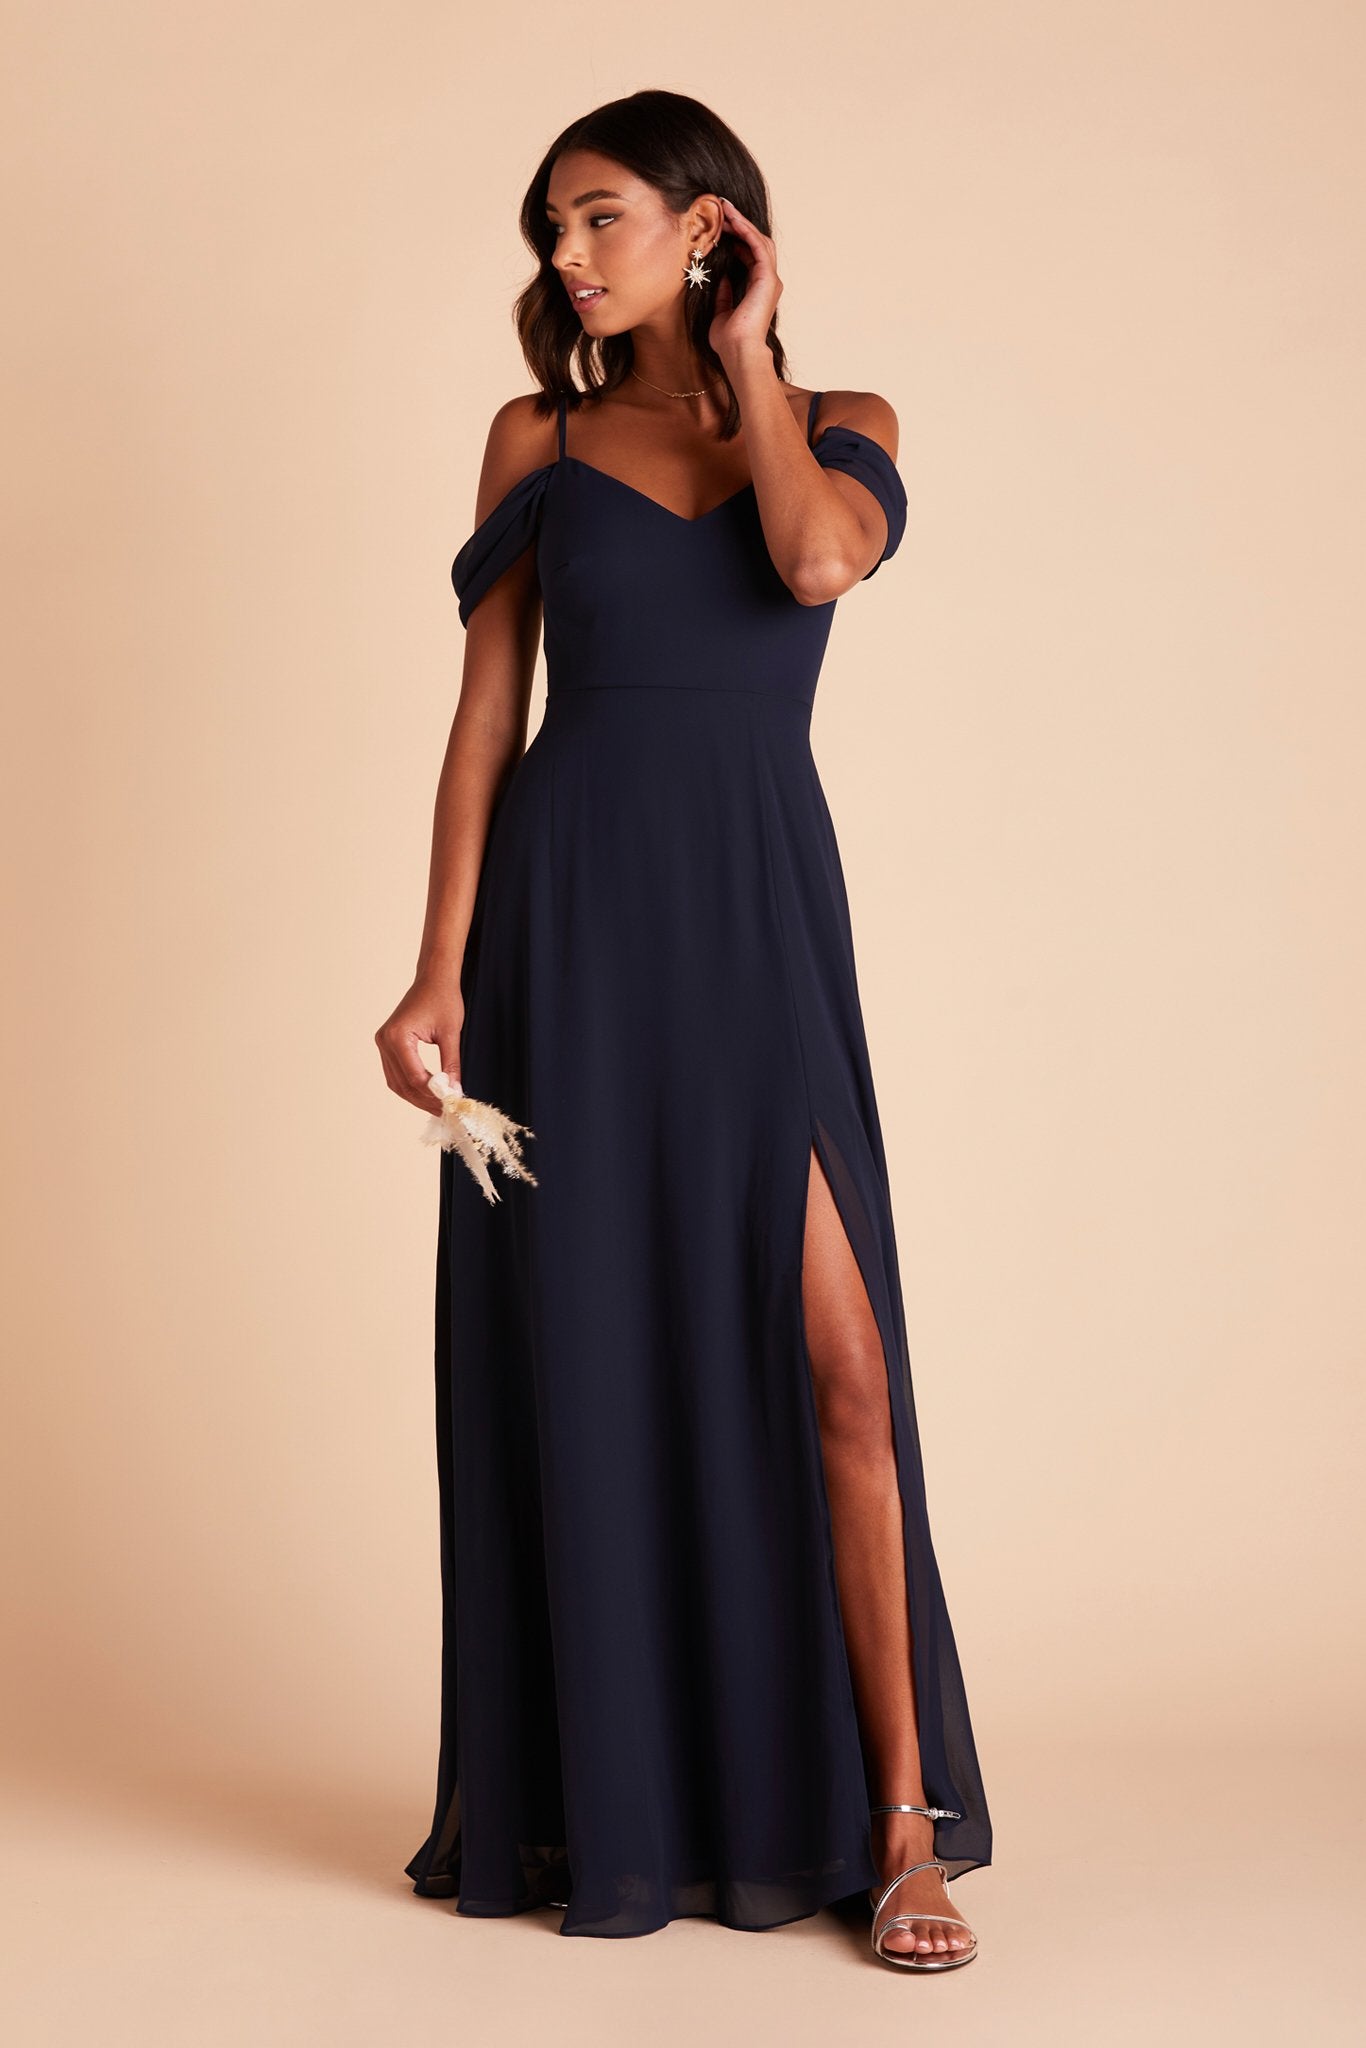 Devin convertible bridesmaid dress with slit in navy blue chiffon by Birdy Grey, front view